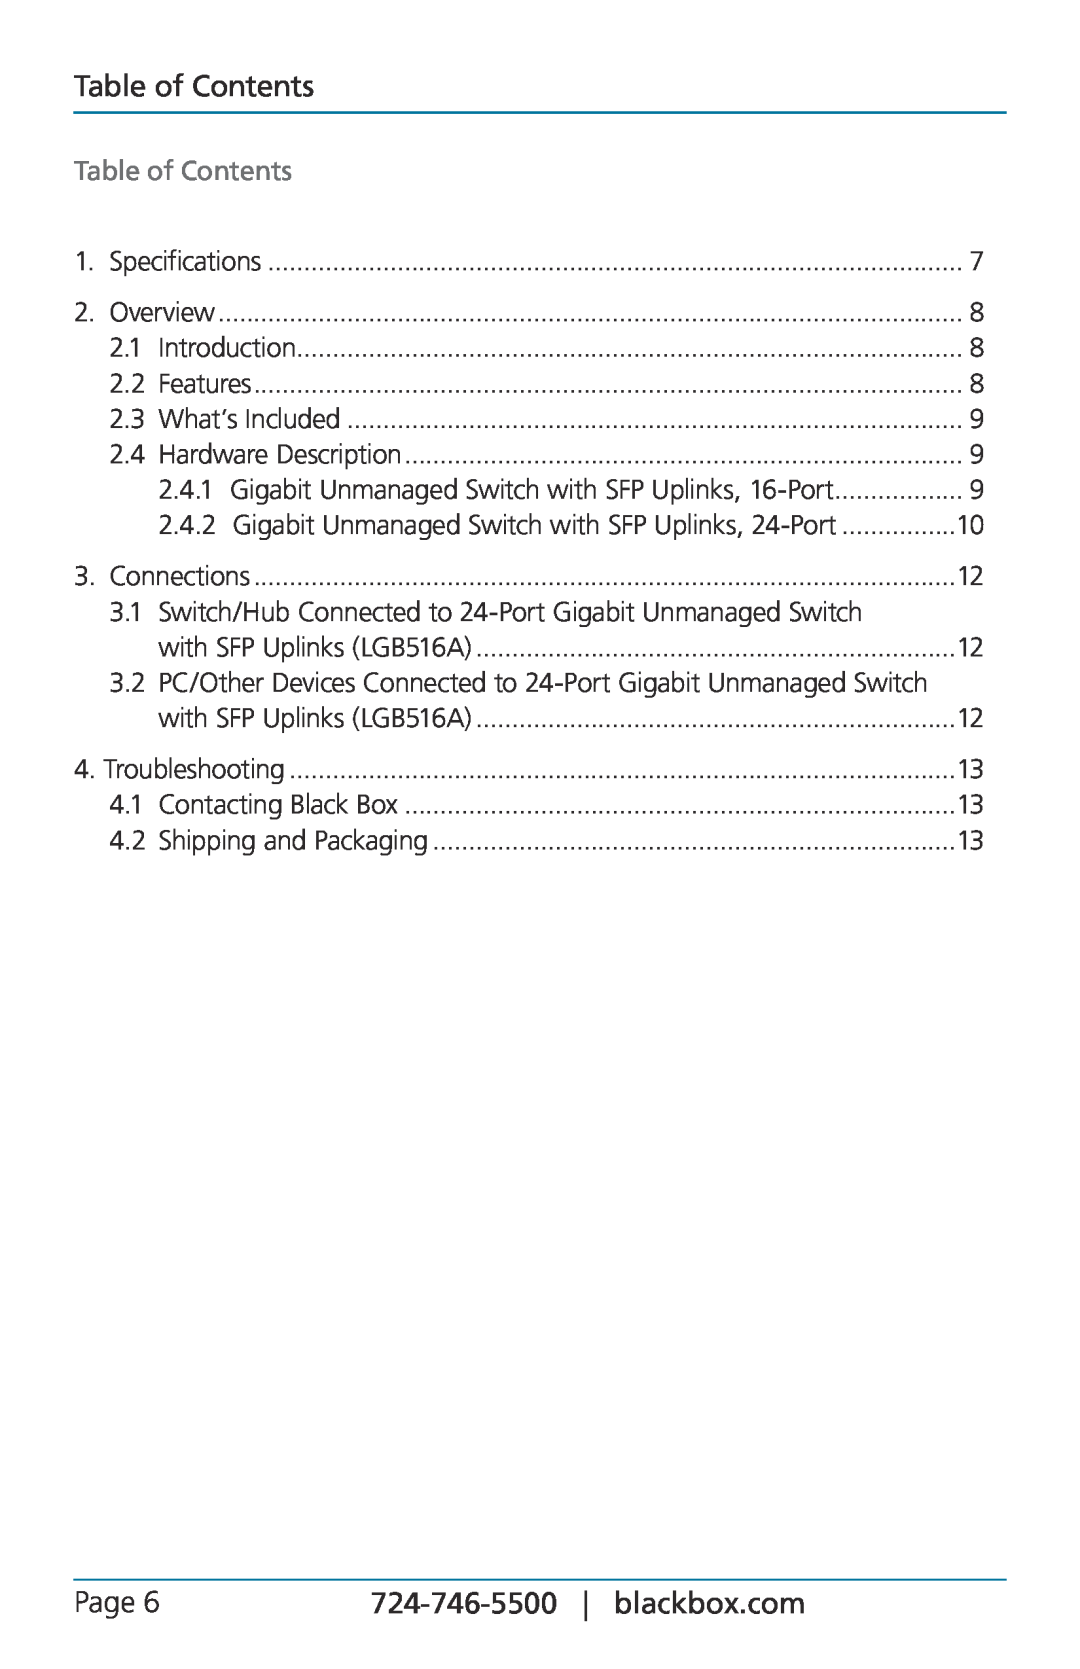 Black Box lgb524a, lgb516a, solid gigabit switching in a rackmount chassis manual Table of Contents, Page 